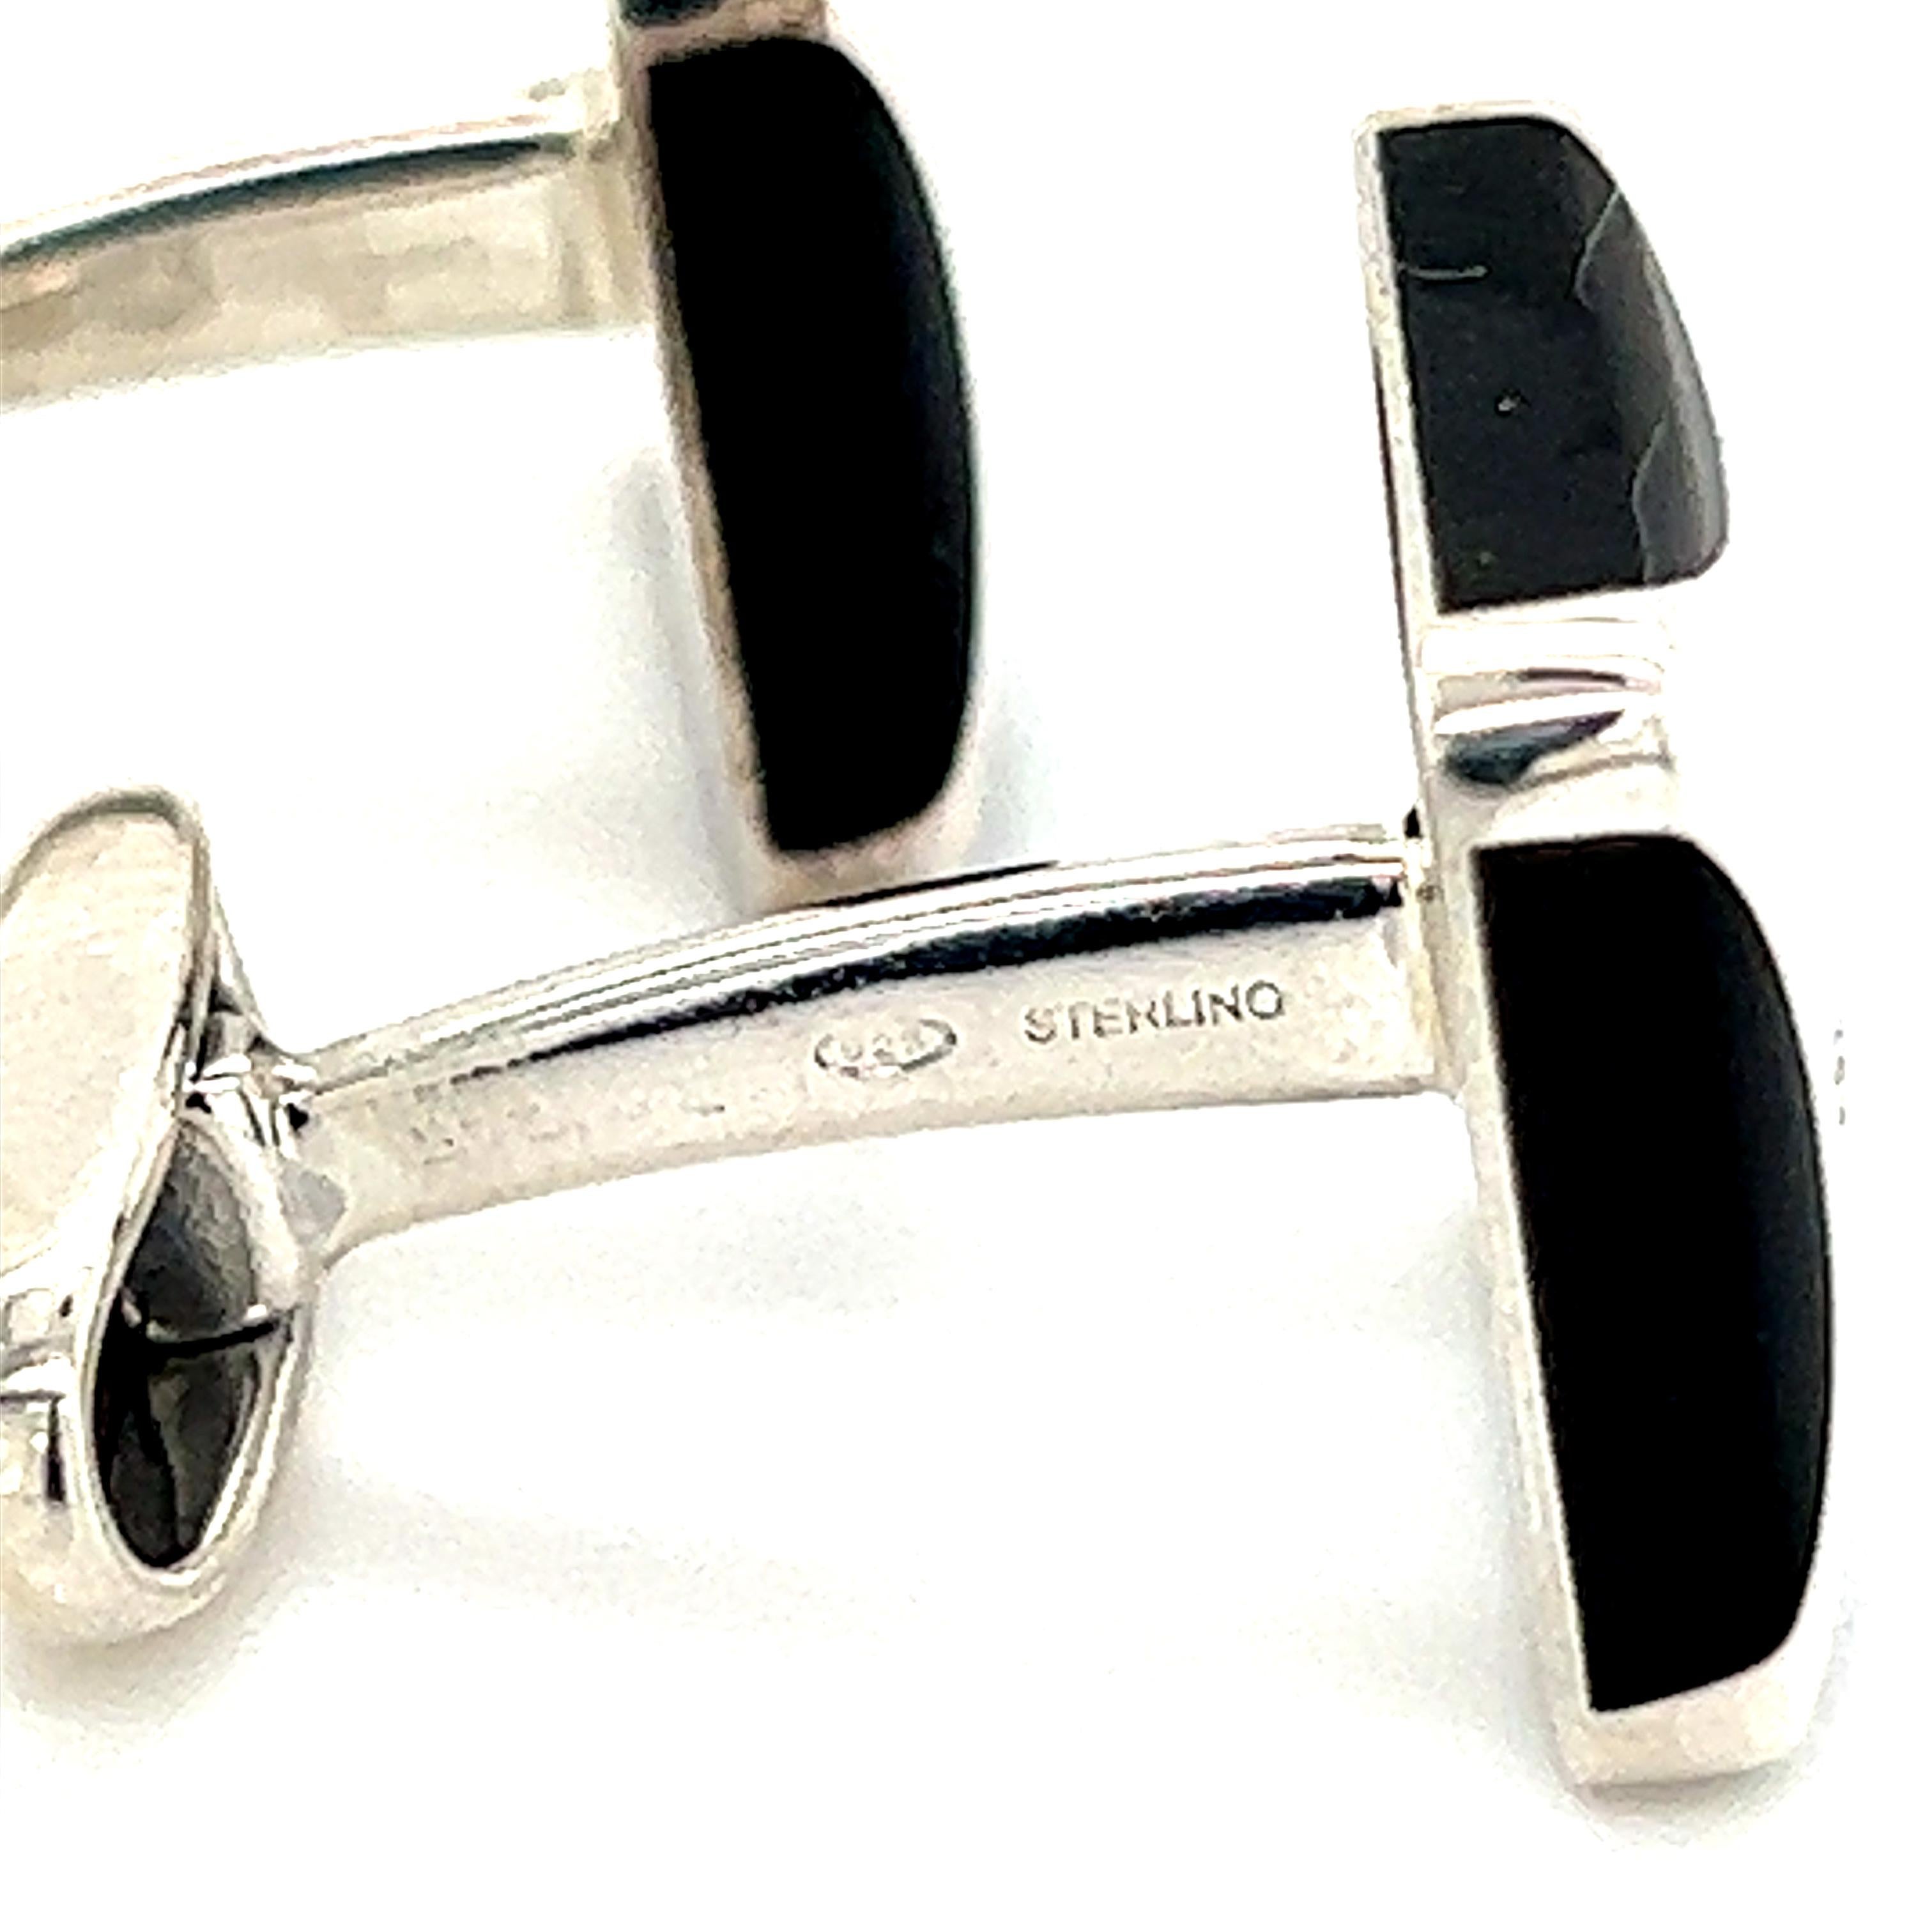 Bulgary Estate Onyx Cufflinks Sterling Silver 19.24 Grams B1 In Good Condition For Sale In Brooklyn, NY